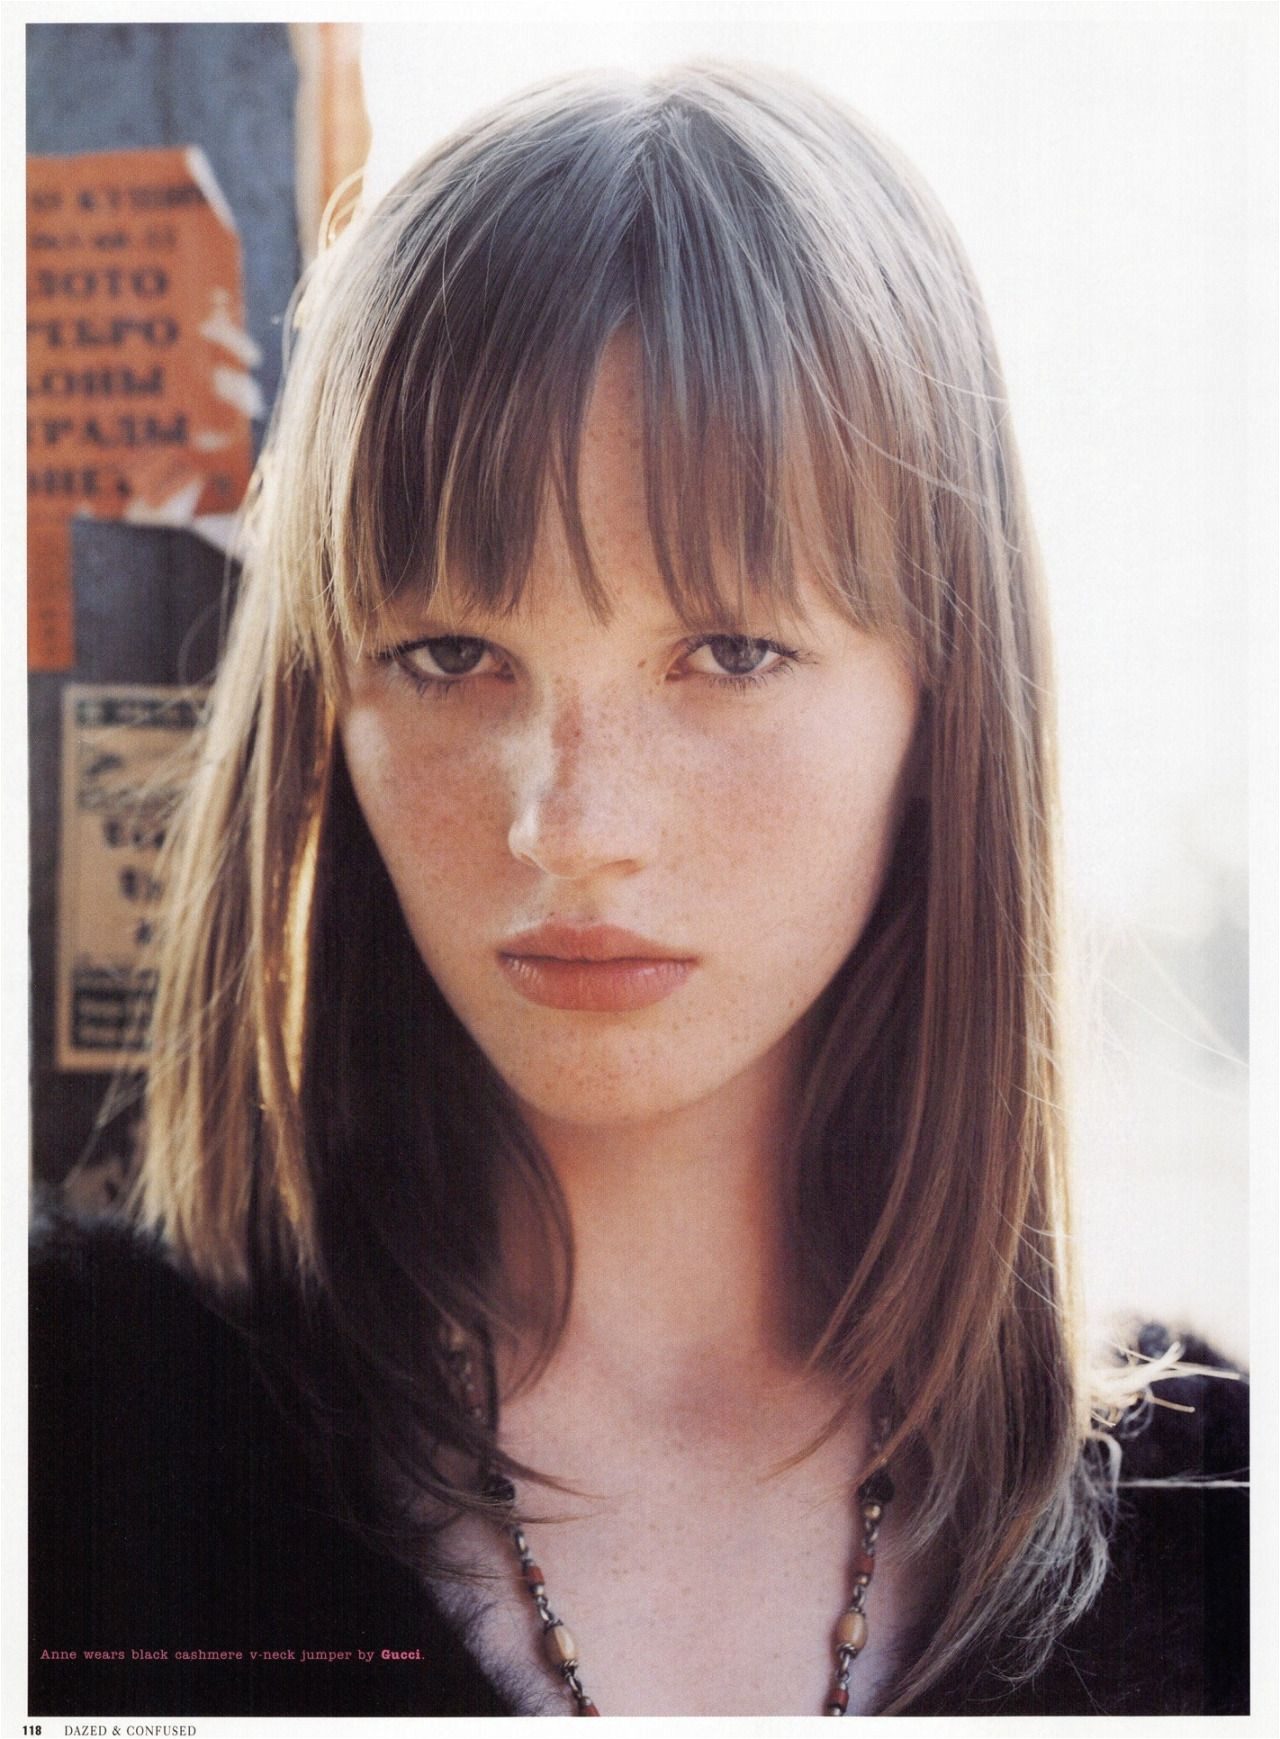 Dazed & Confused January 2002 “Anne V ” Anne Vyalitsyna by Laurie Bartley stylist Miranda Robson